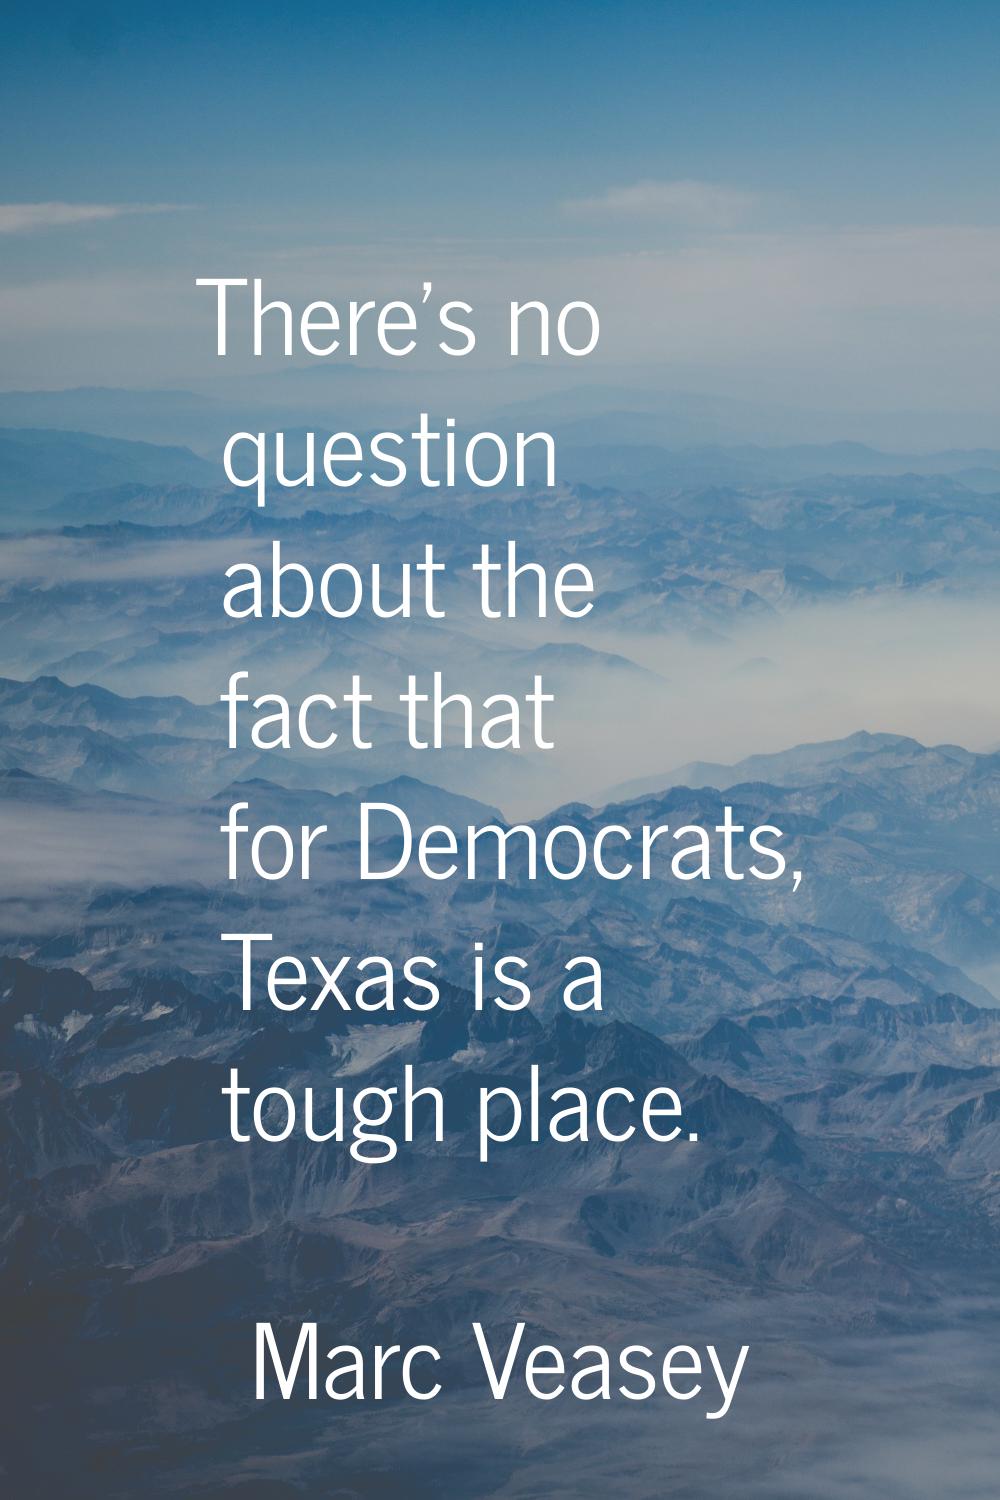 There's no question about the fact that for Democrats, Texas is a tough place.